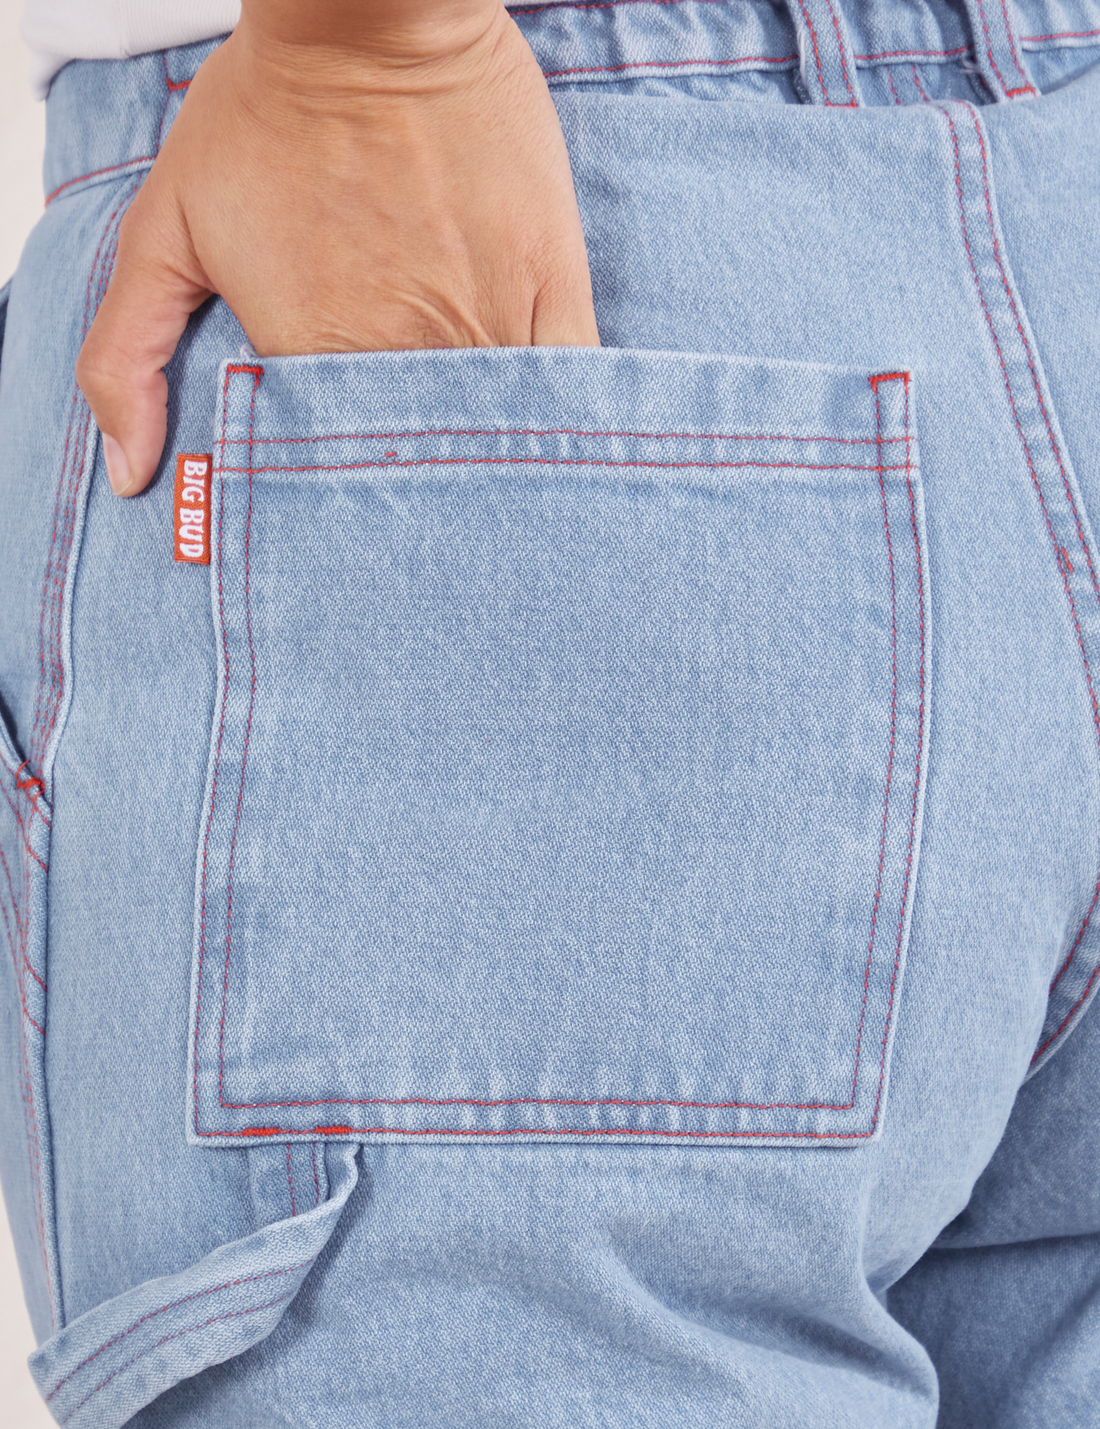 Back pocket close up of Carpenter Jeans in Light Wash. Tiara has her hand tucked into the pocket.